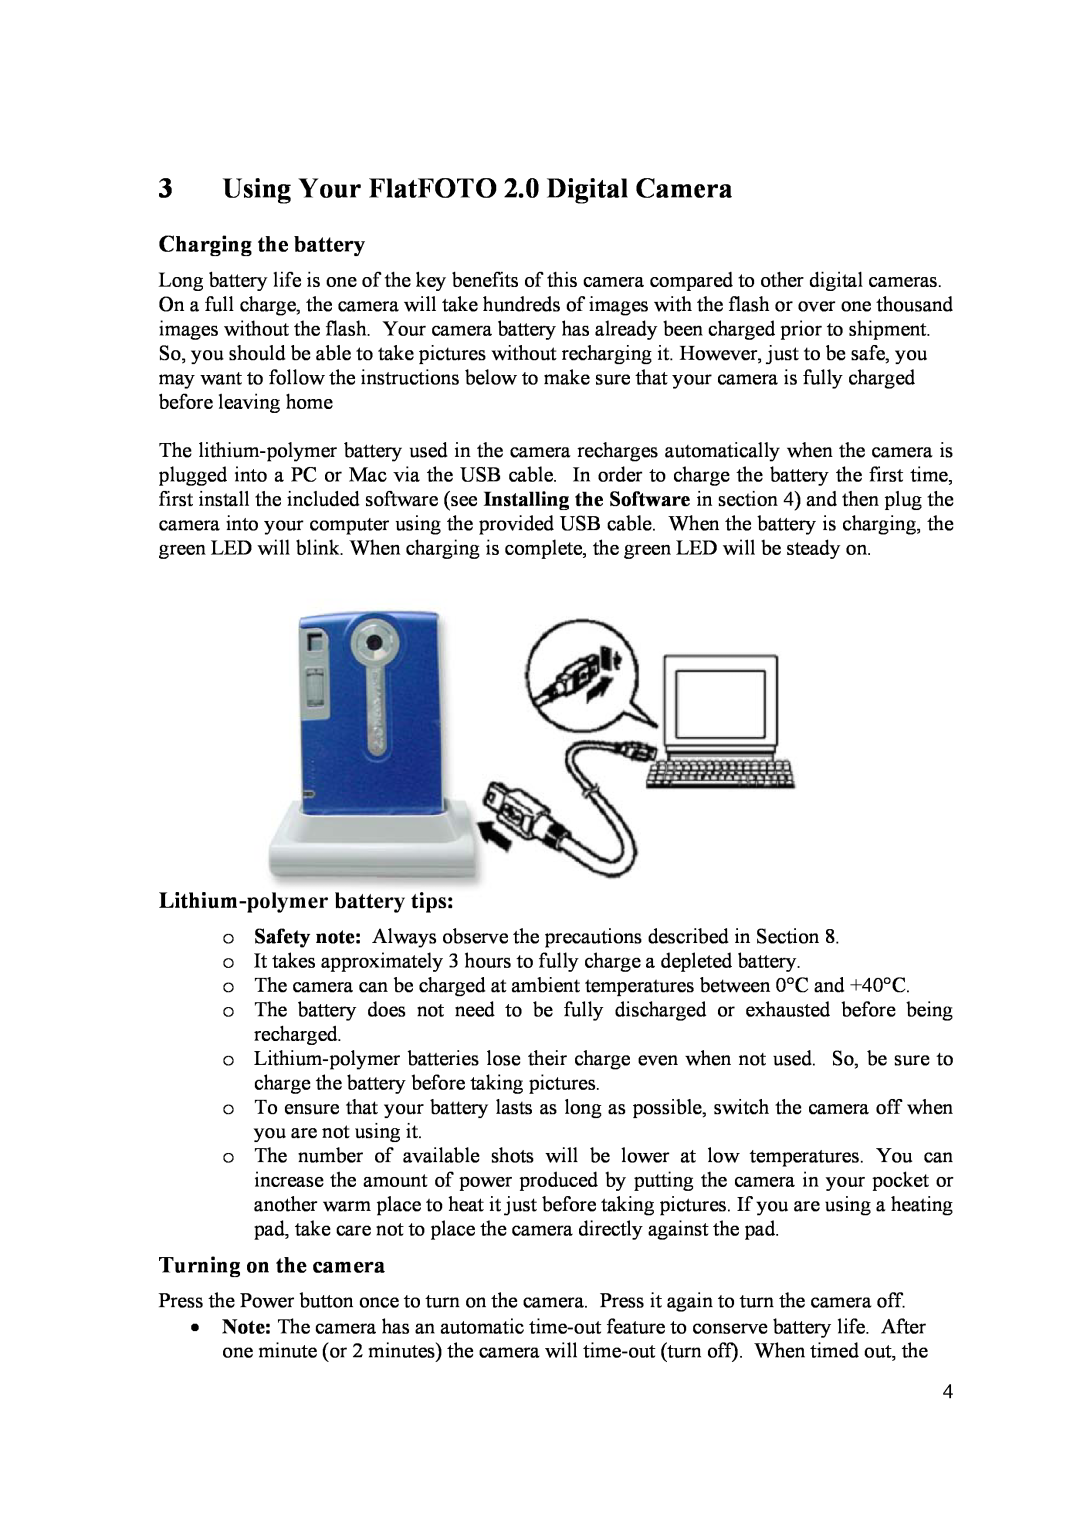 Samsung user manual Using Your FlatFOTO 2.0 Digital Camera, Charging the battery, Lithium-polymer battery tips 